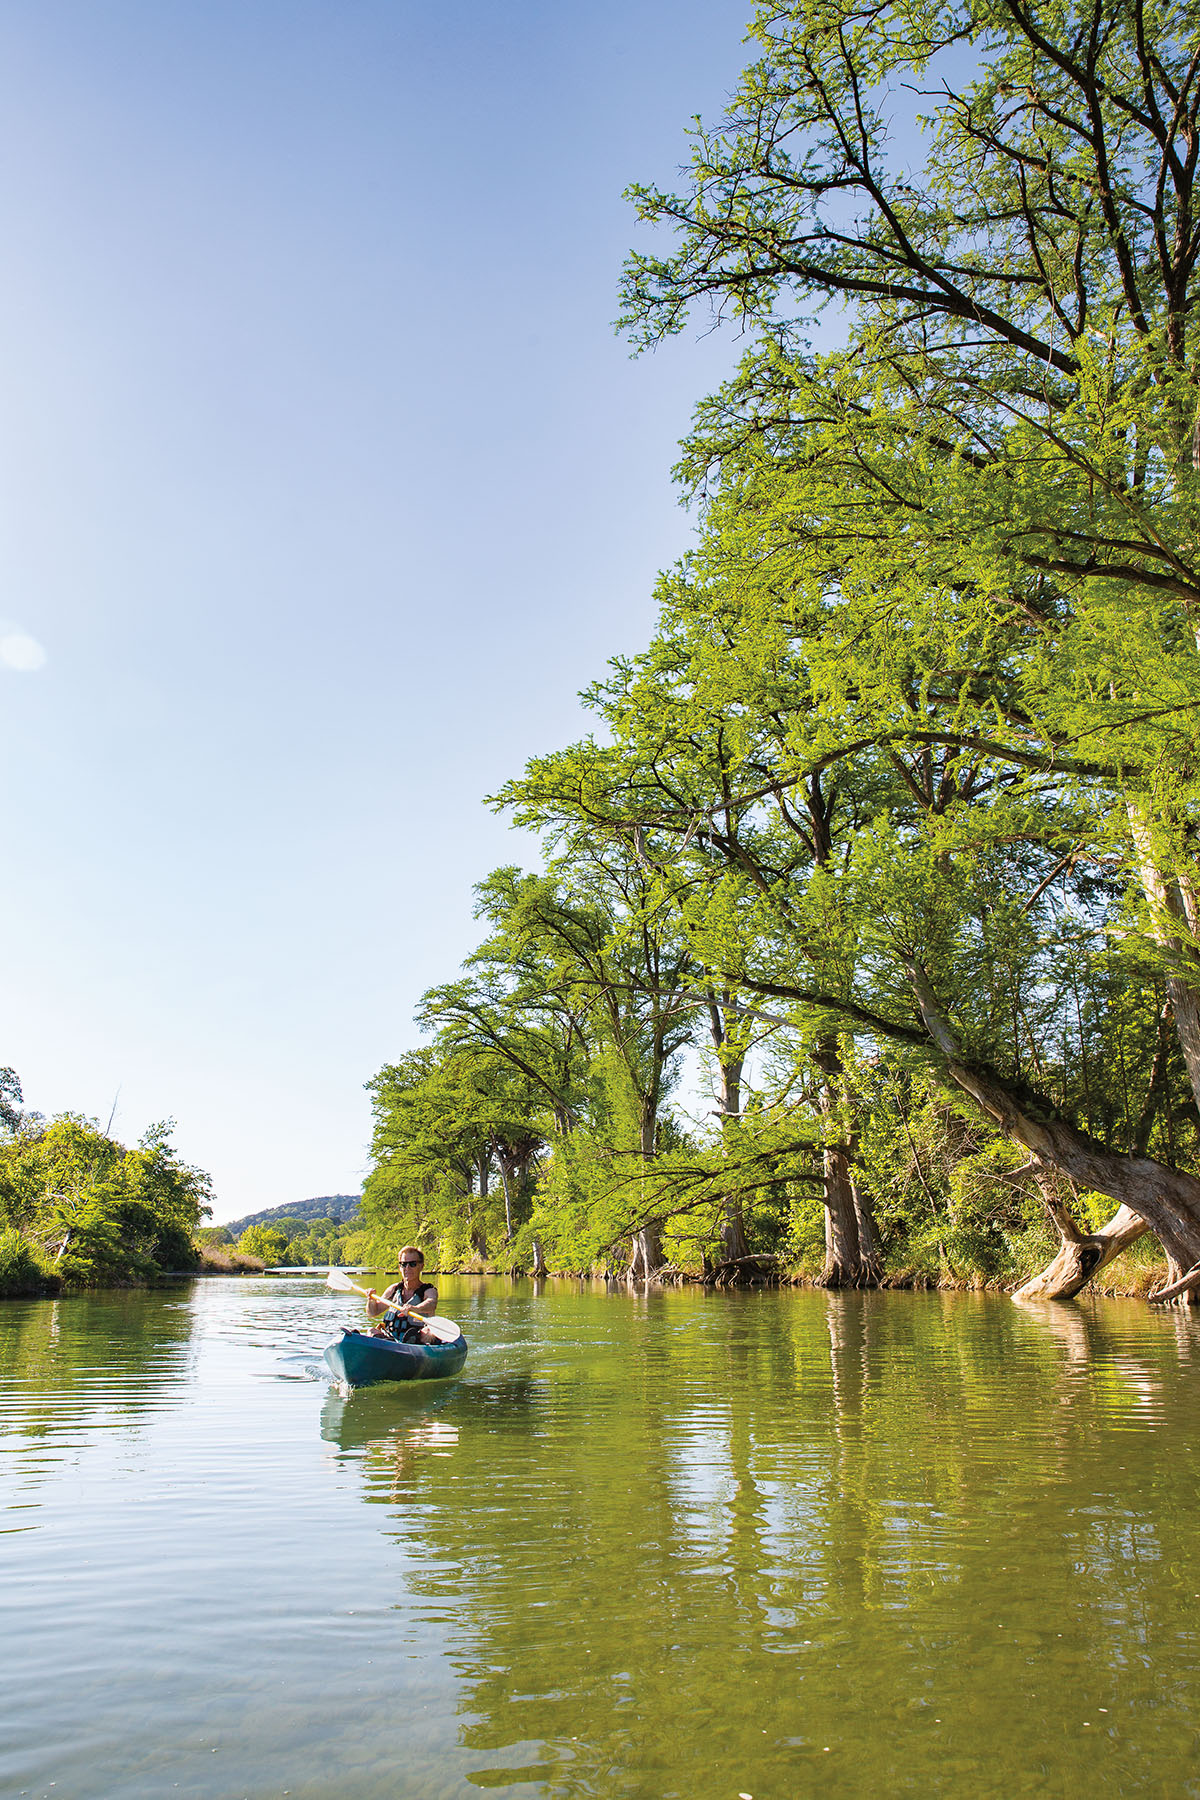 Behold The Splendid And Fragile Beauty Of The Hill Country’s Keystone River